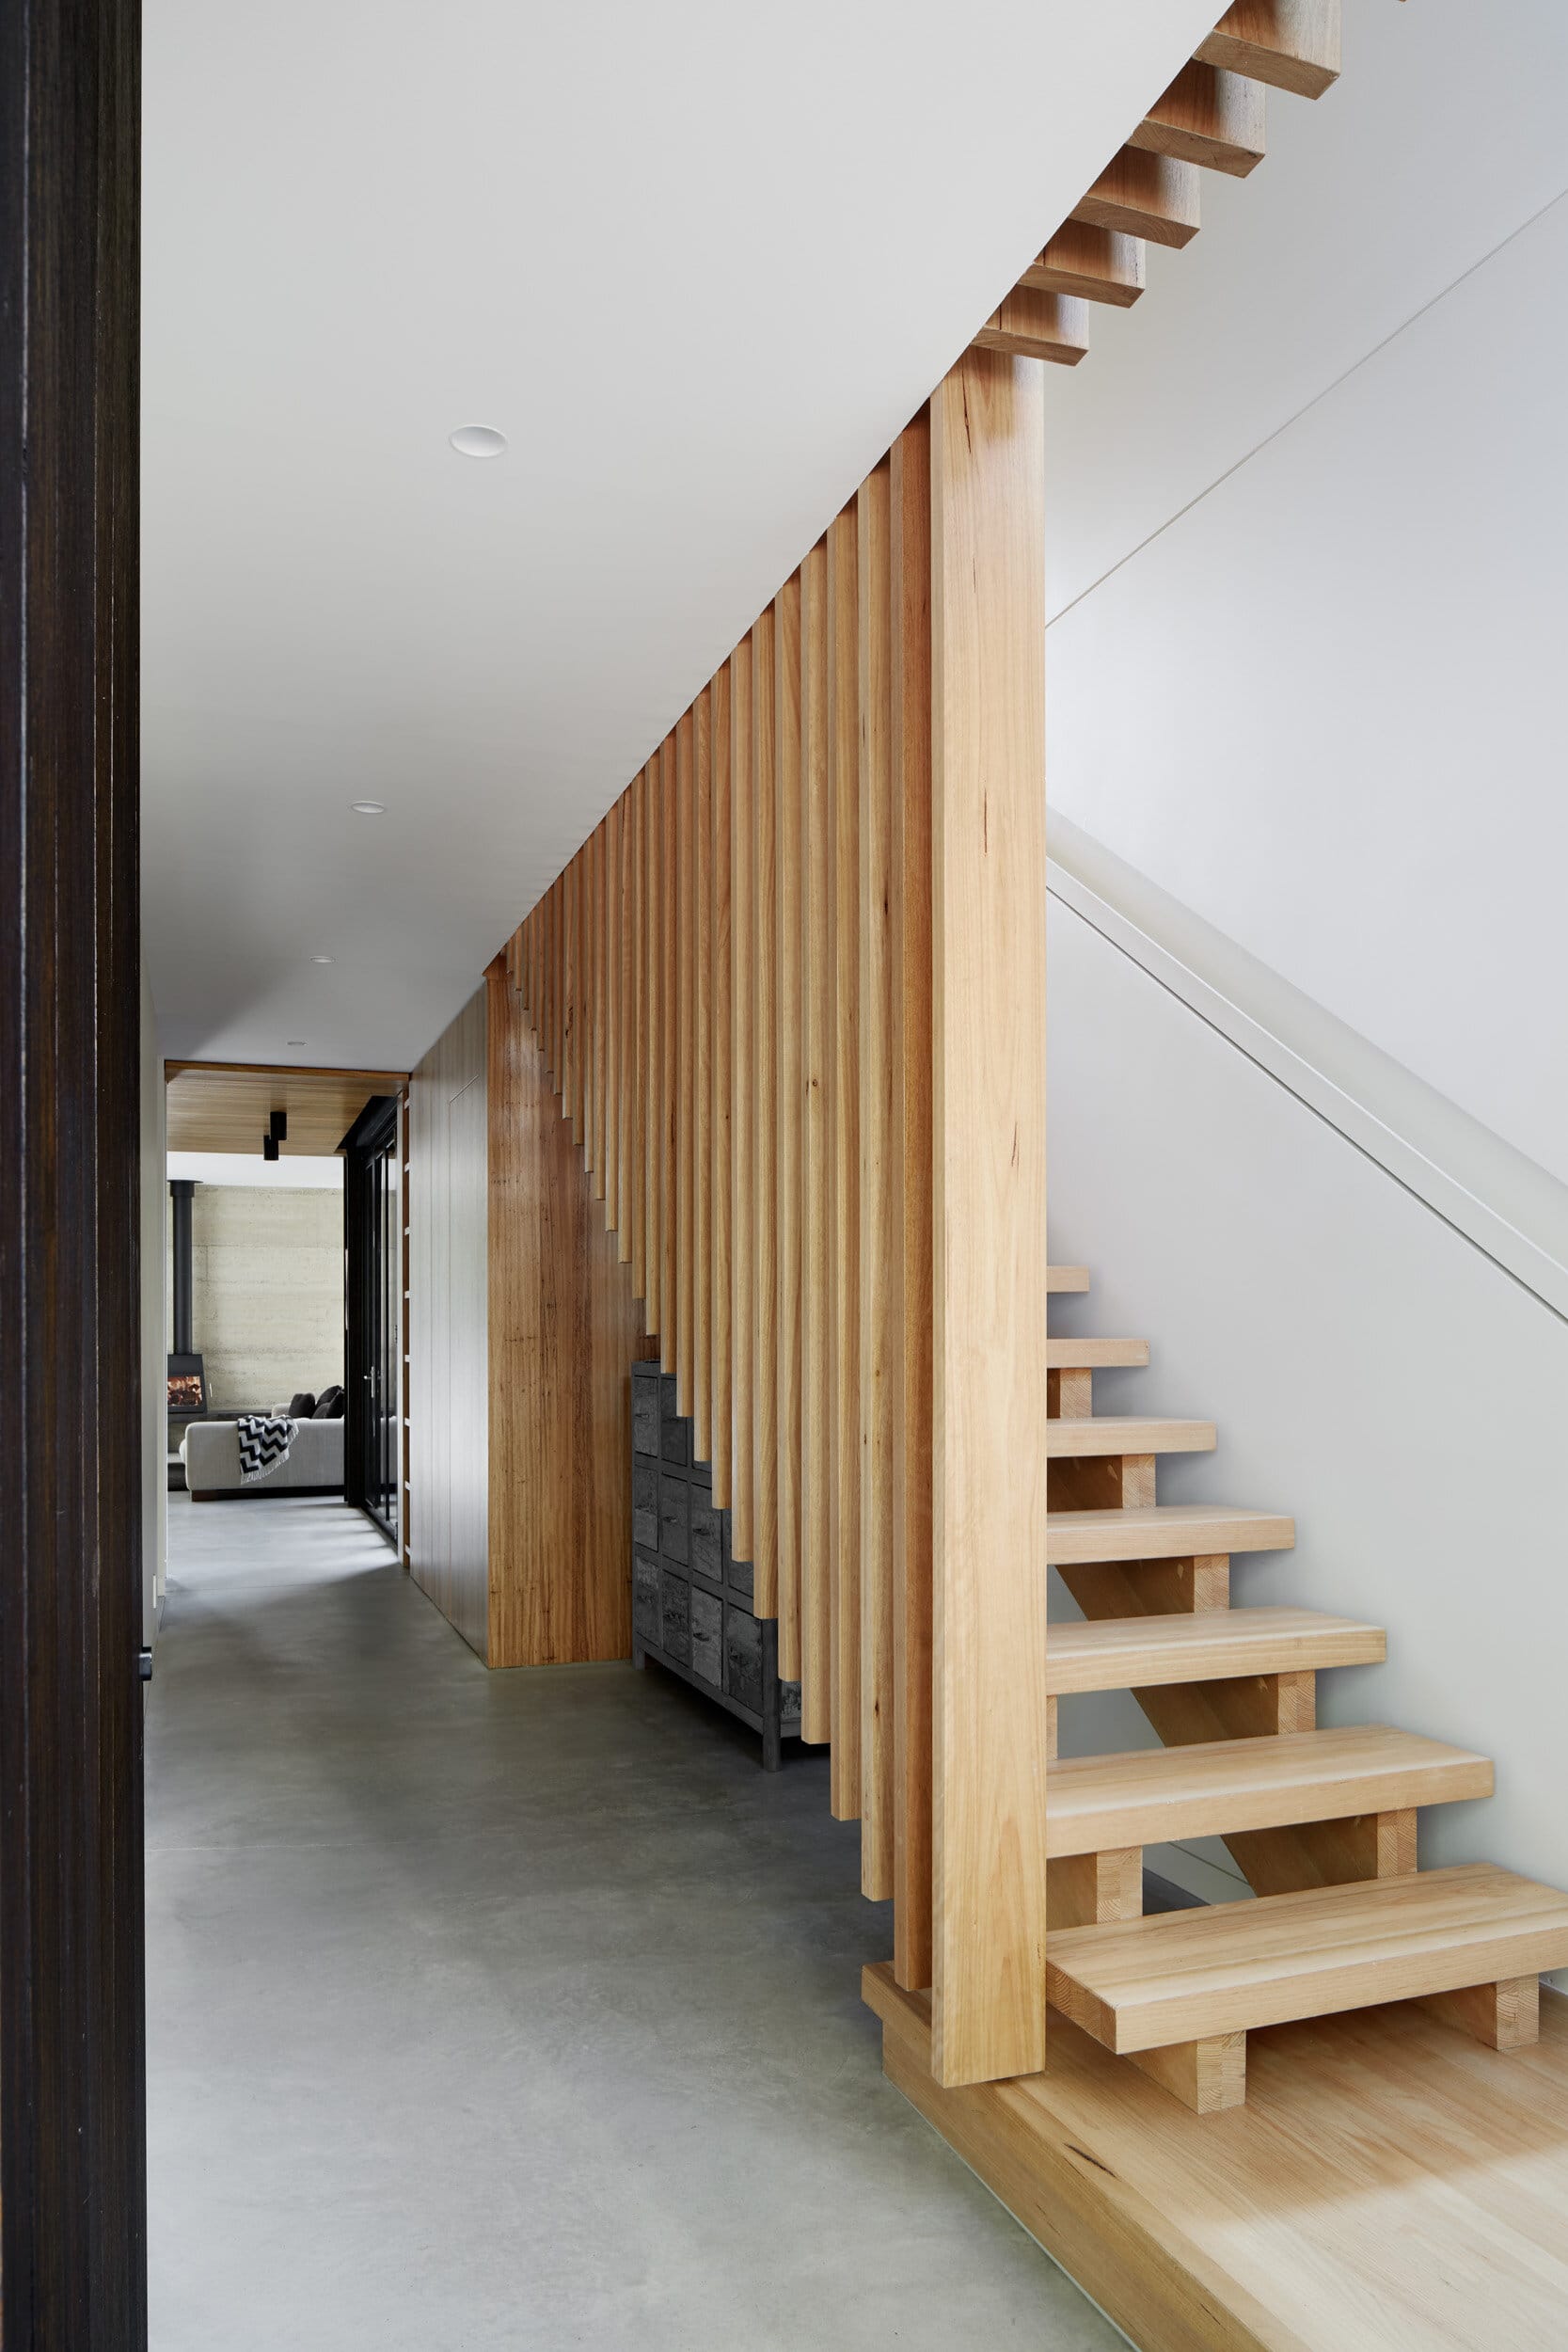 Laurel Grove by Kirsten Johnstone Architecture. Photography by Tatjana Plitt. Timber staircase with timber balustrade. Concrete floors on ground floor hallway. 